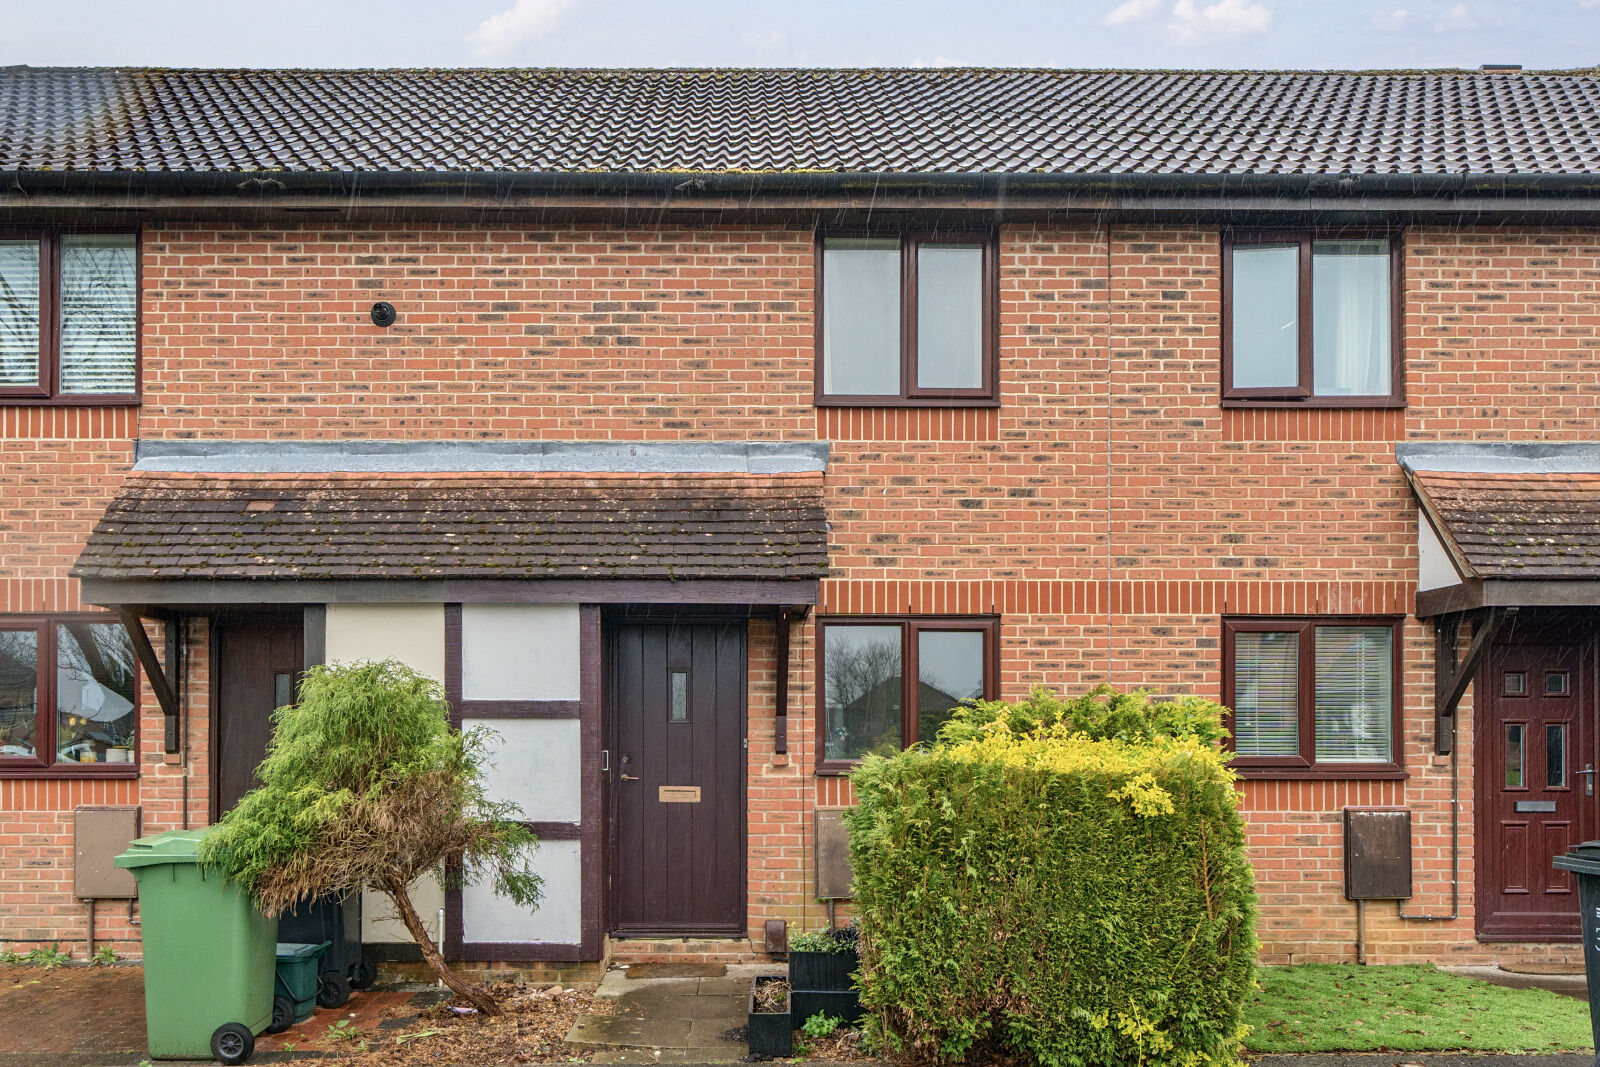 2 bedroom mid terraced house for sale Cullerne Close, Abingdon, OX14, main image